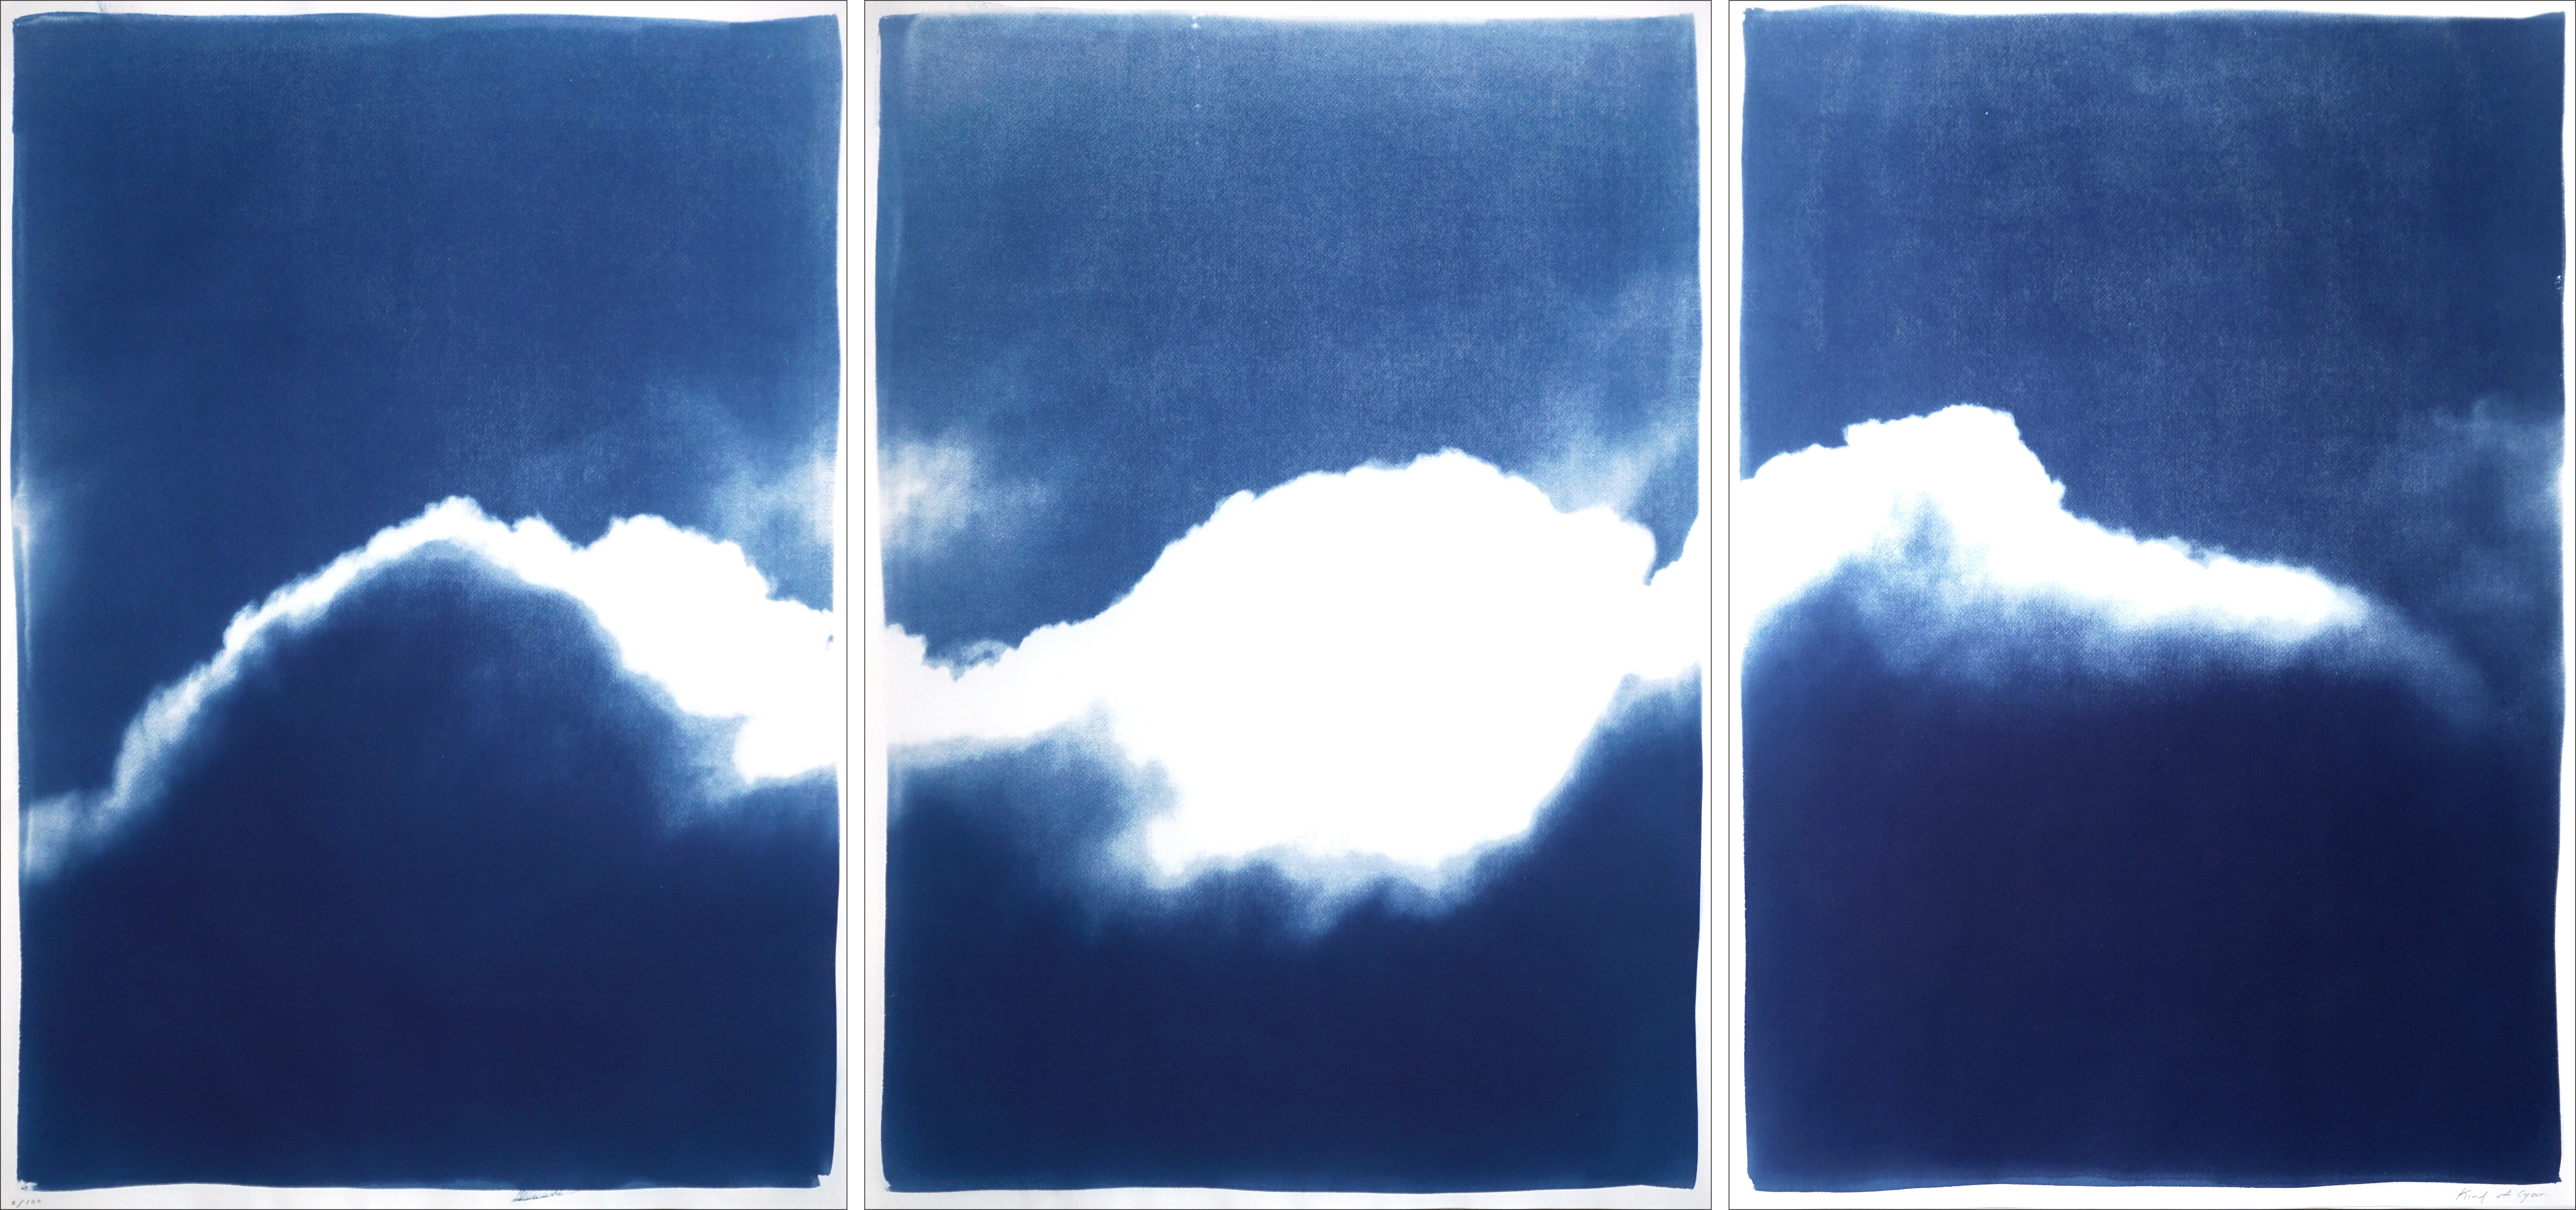 Large Triptych, Waves of Clouds, Deep Blue Cyanotype Print, Pleasant Cloudy Sky